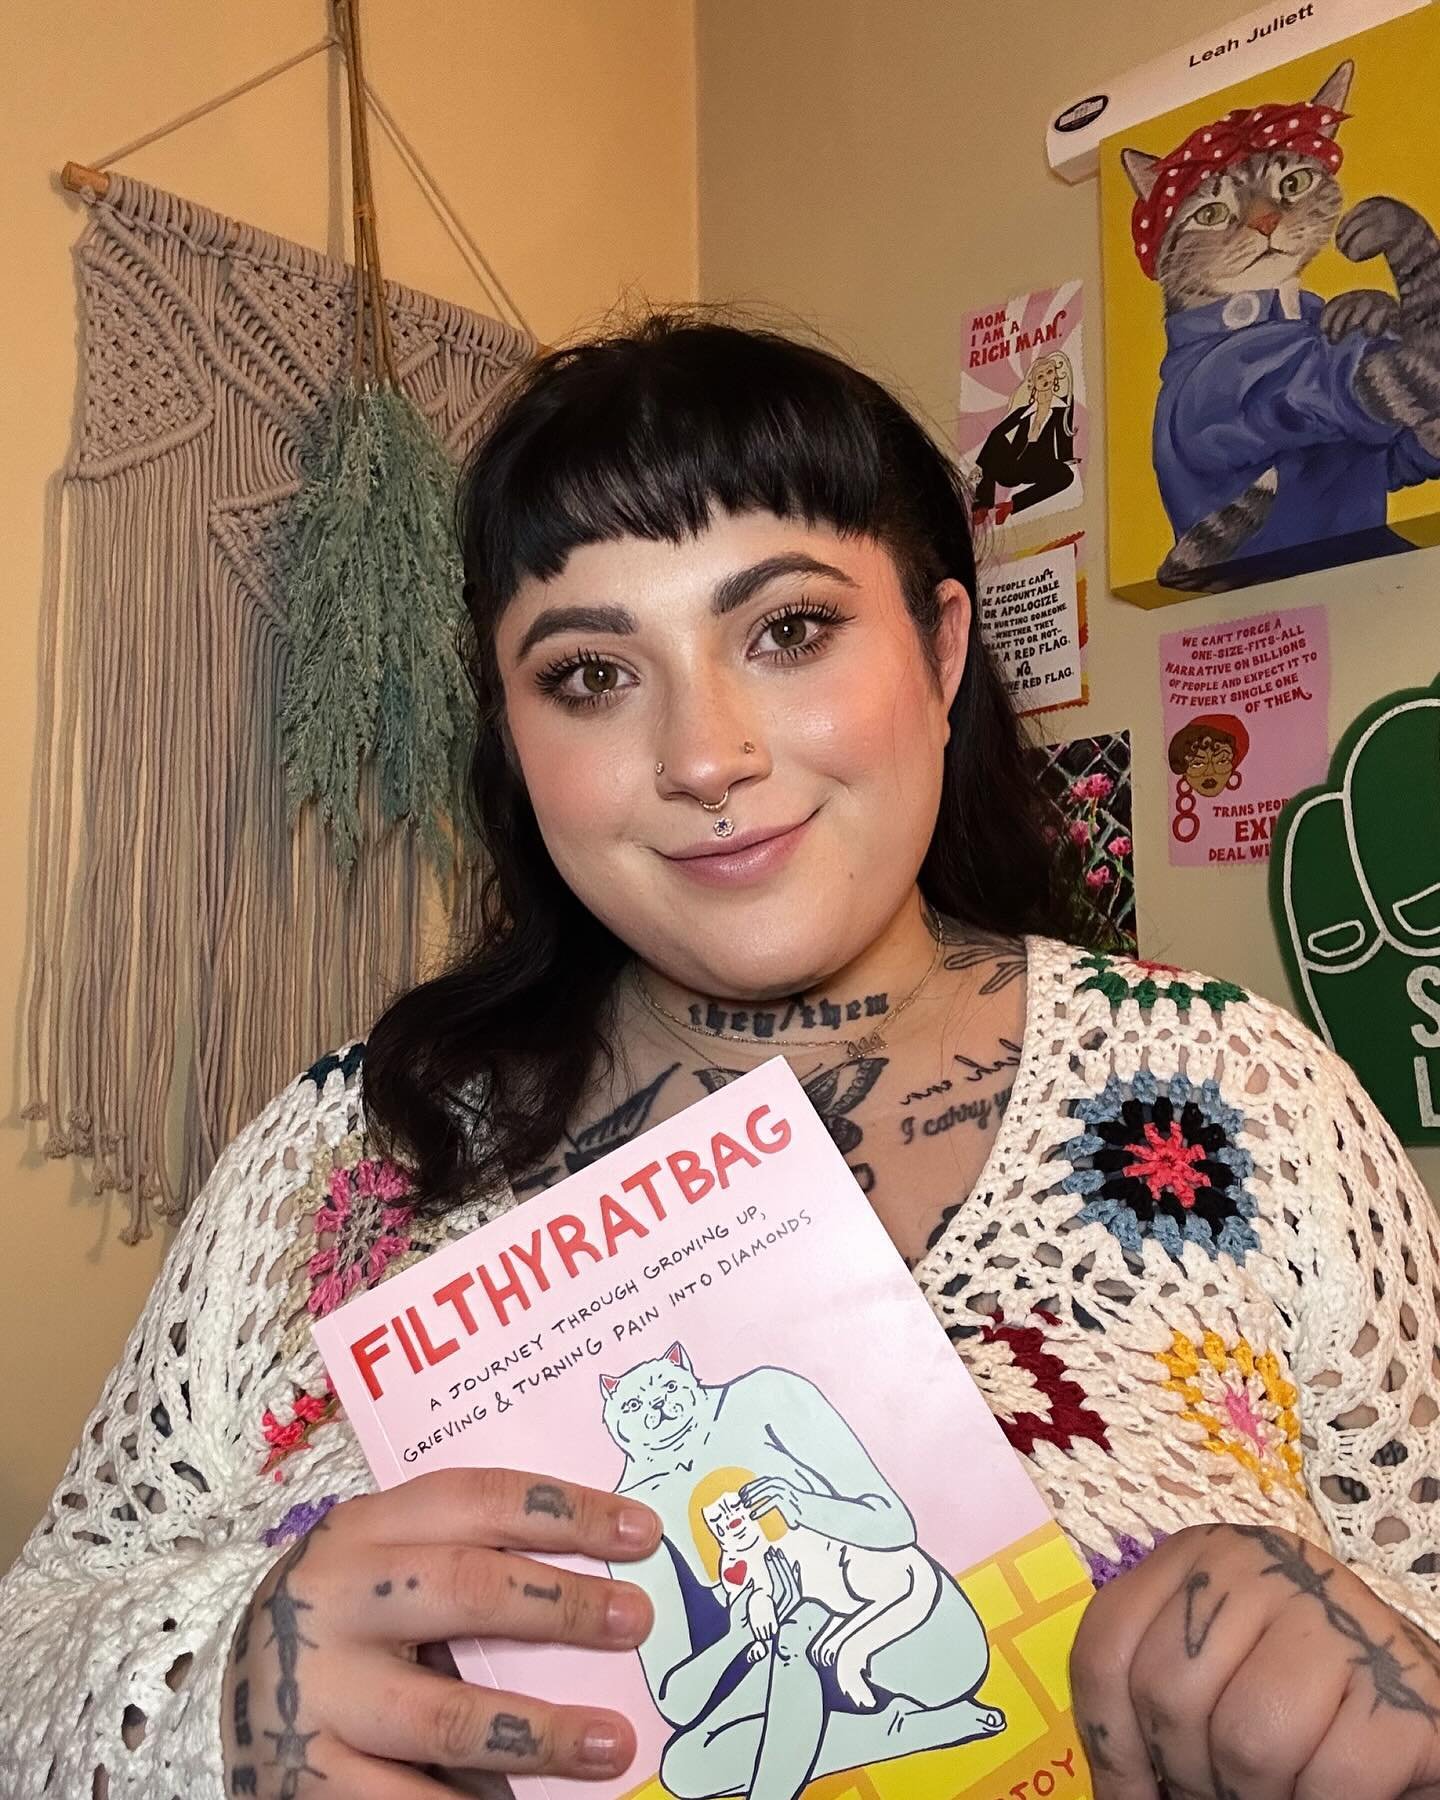 I was so super excited to receive an advance copy of Celeste Mountjoy&rsquo;s fucking banger new book, FILTHYRATBAG 🌈 If you&rsquo;ve been following me for a while, you may remember that I have one of Celeste&rsquo;s illustrations of a little lizard